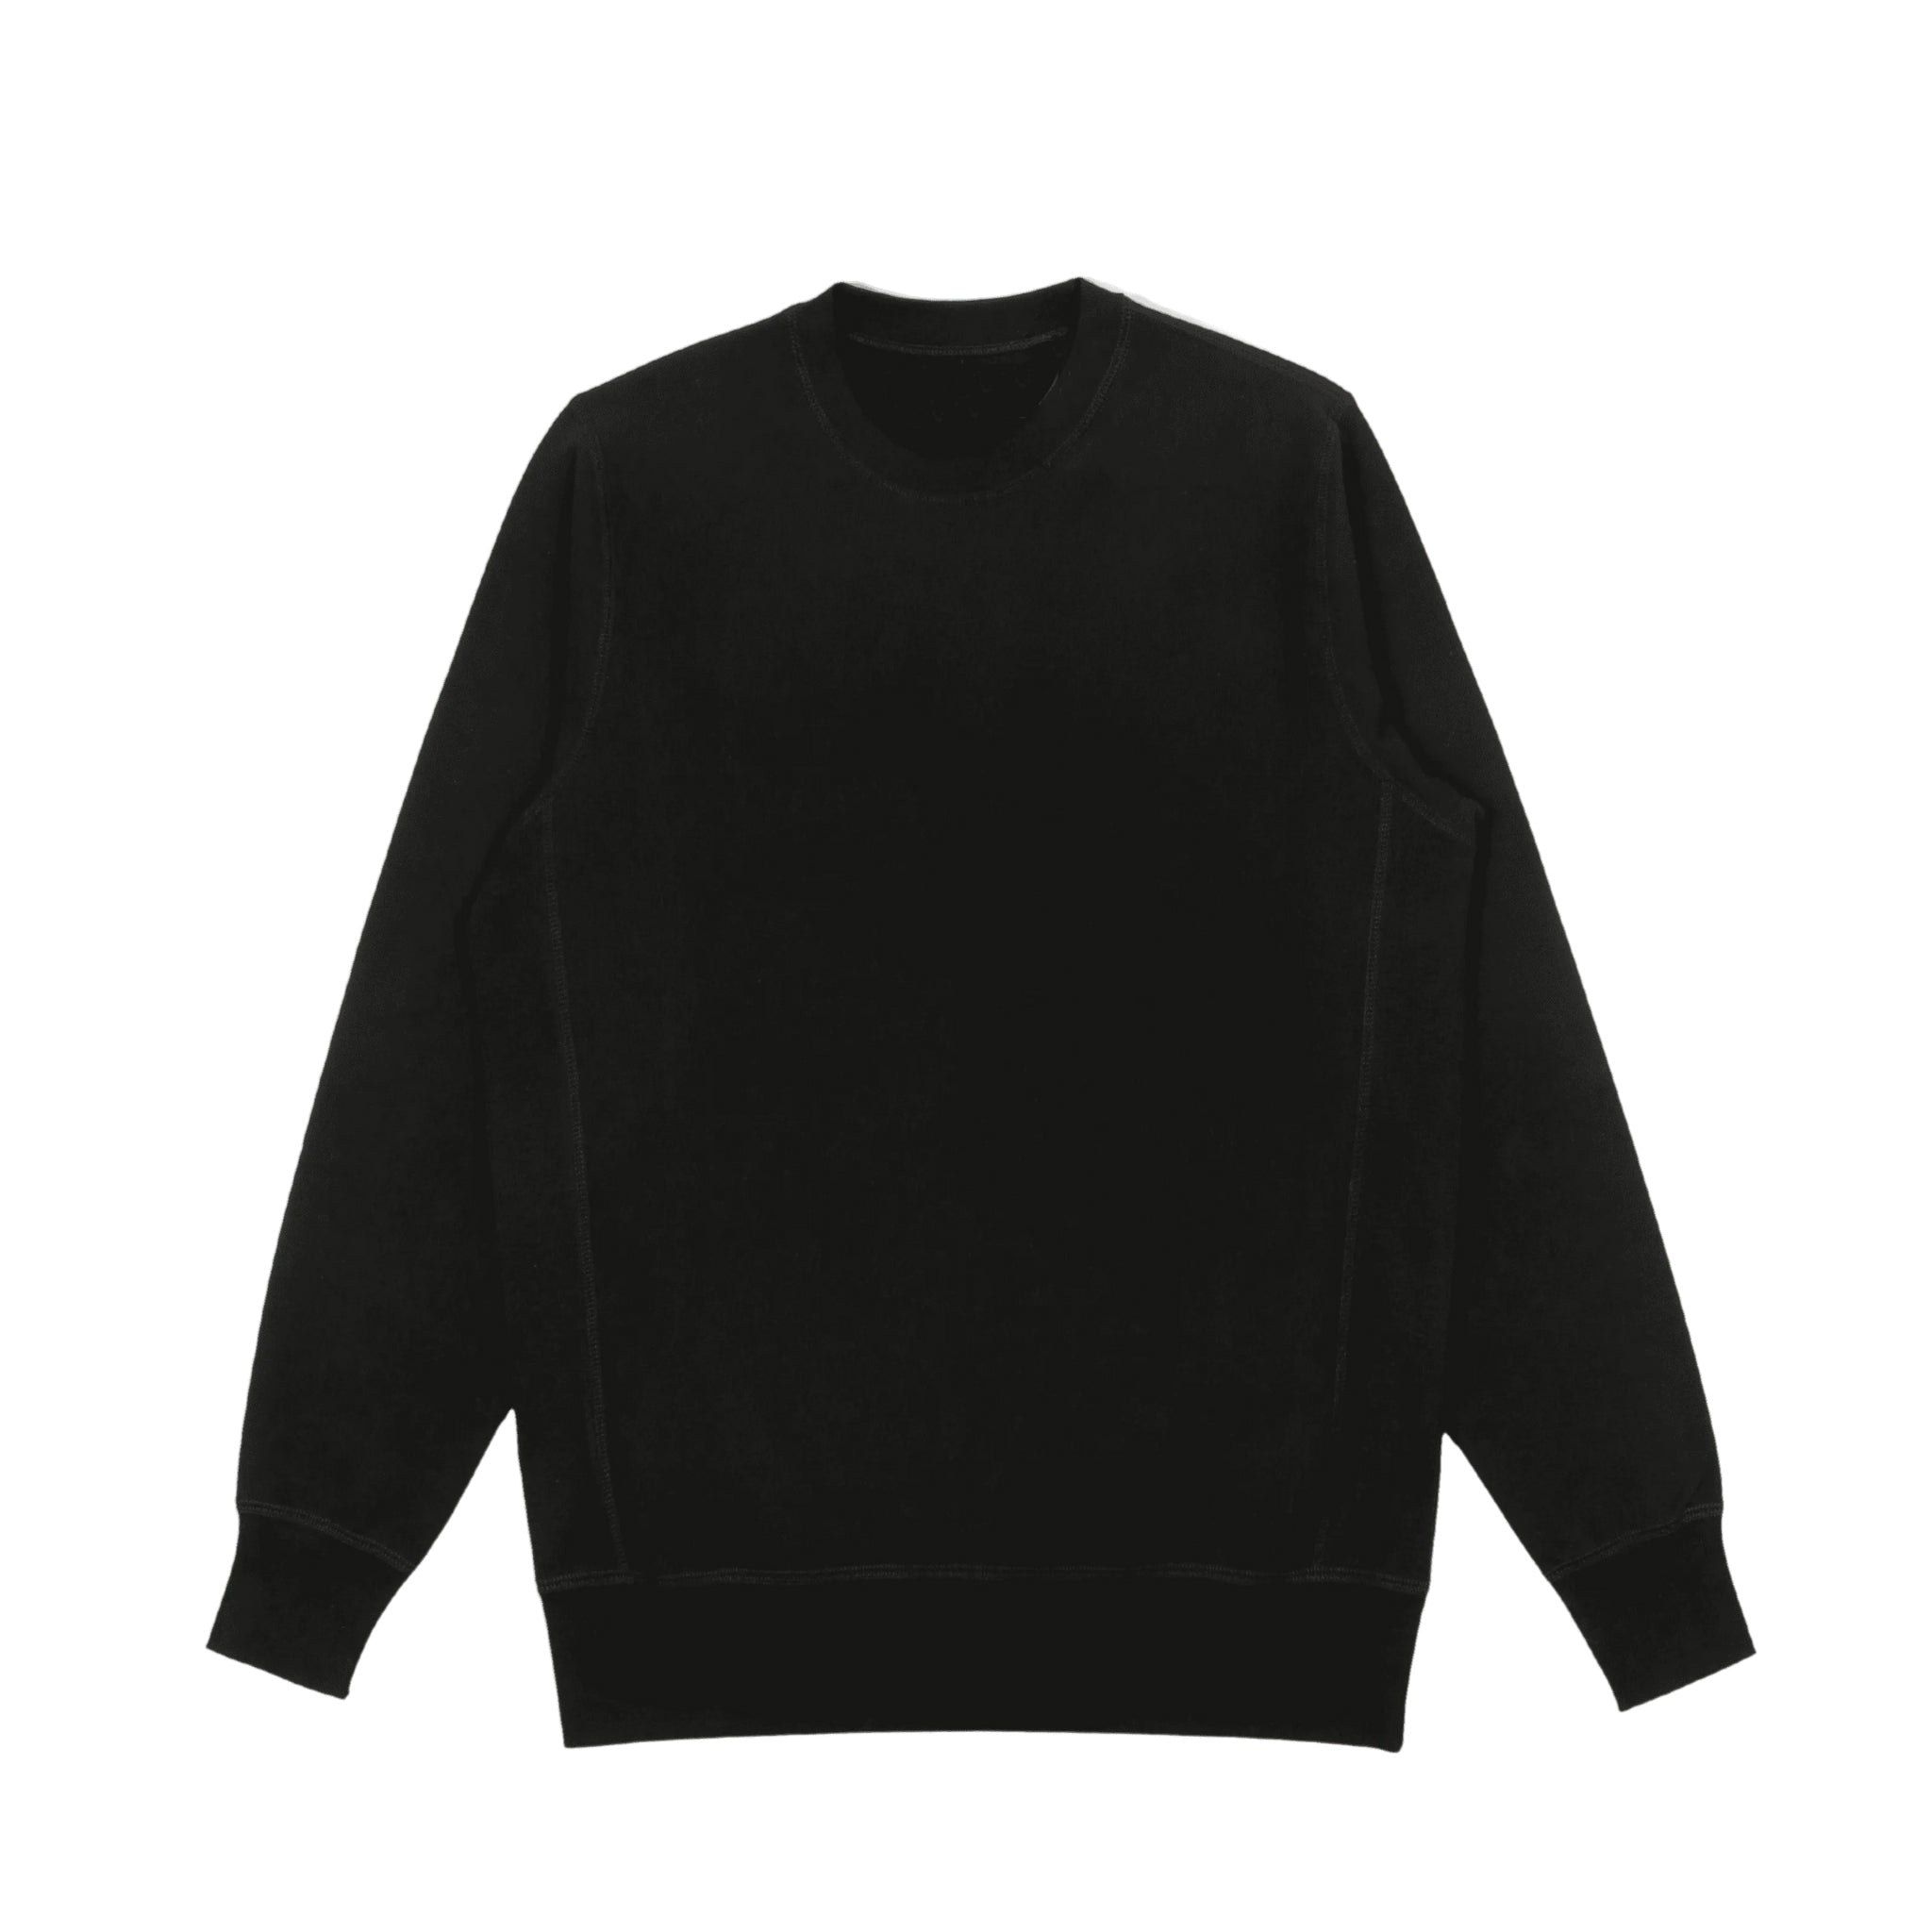 Front view of black heavyweight knit crewneck in 100% cotton